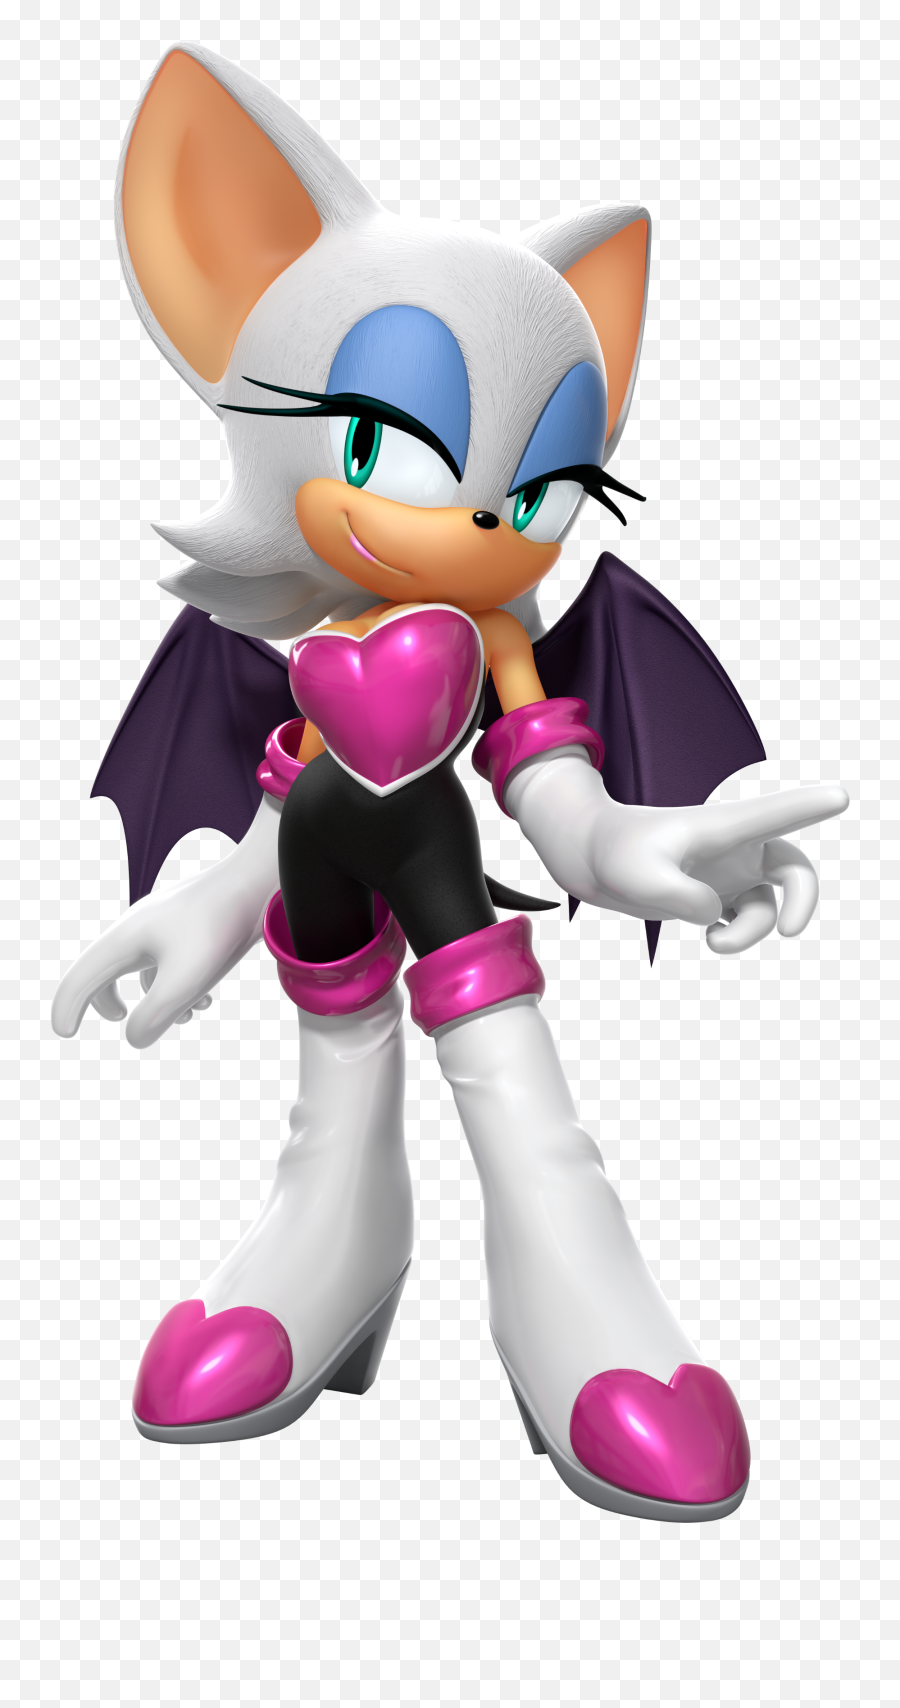 Rouge The Bat - Rouge The Bat Emoji,Sonic Cant Lose Or Show Emotion